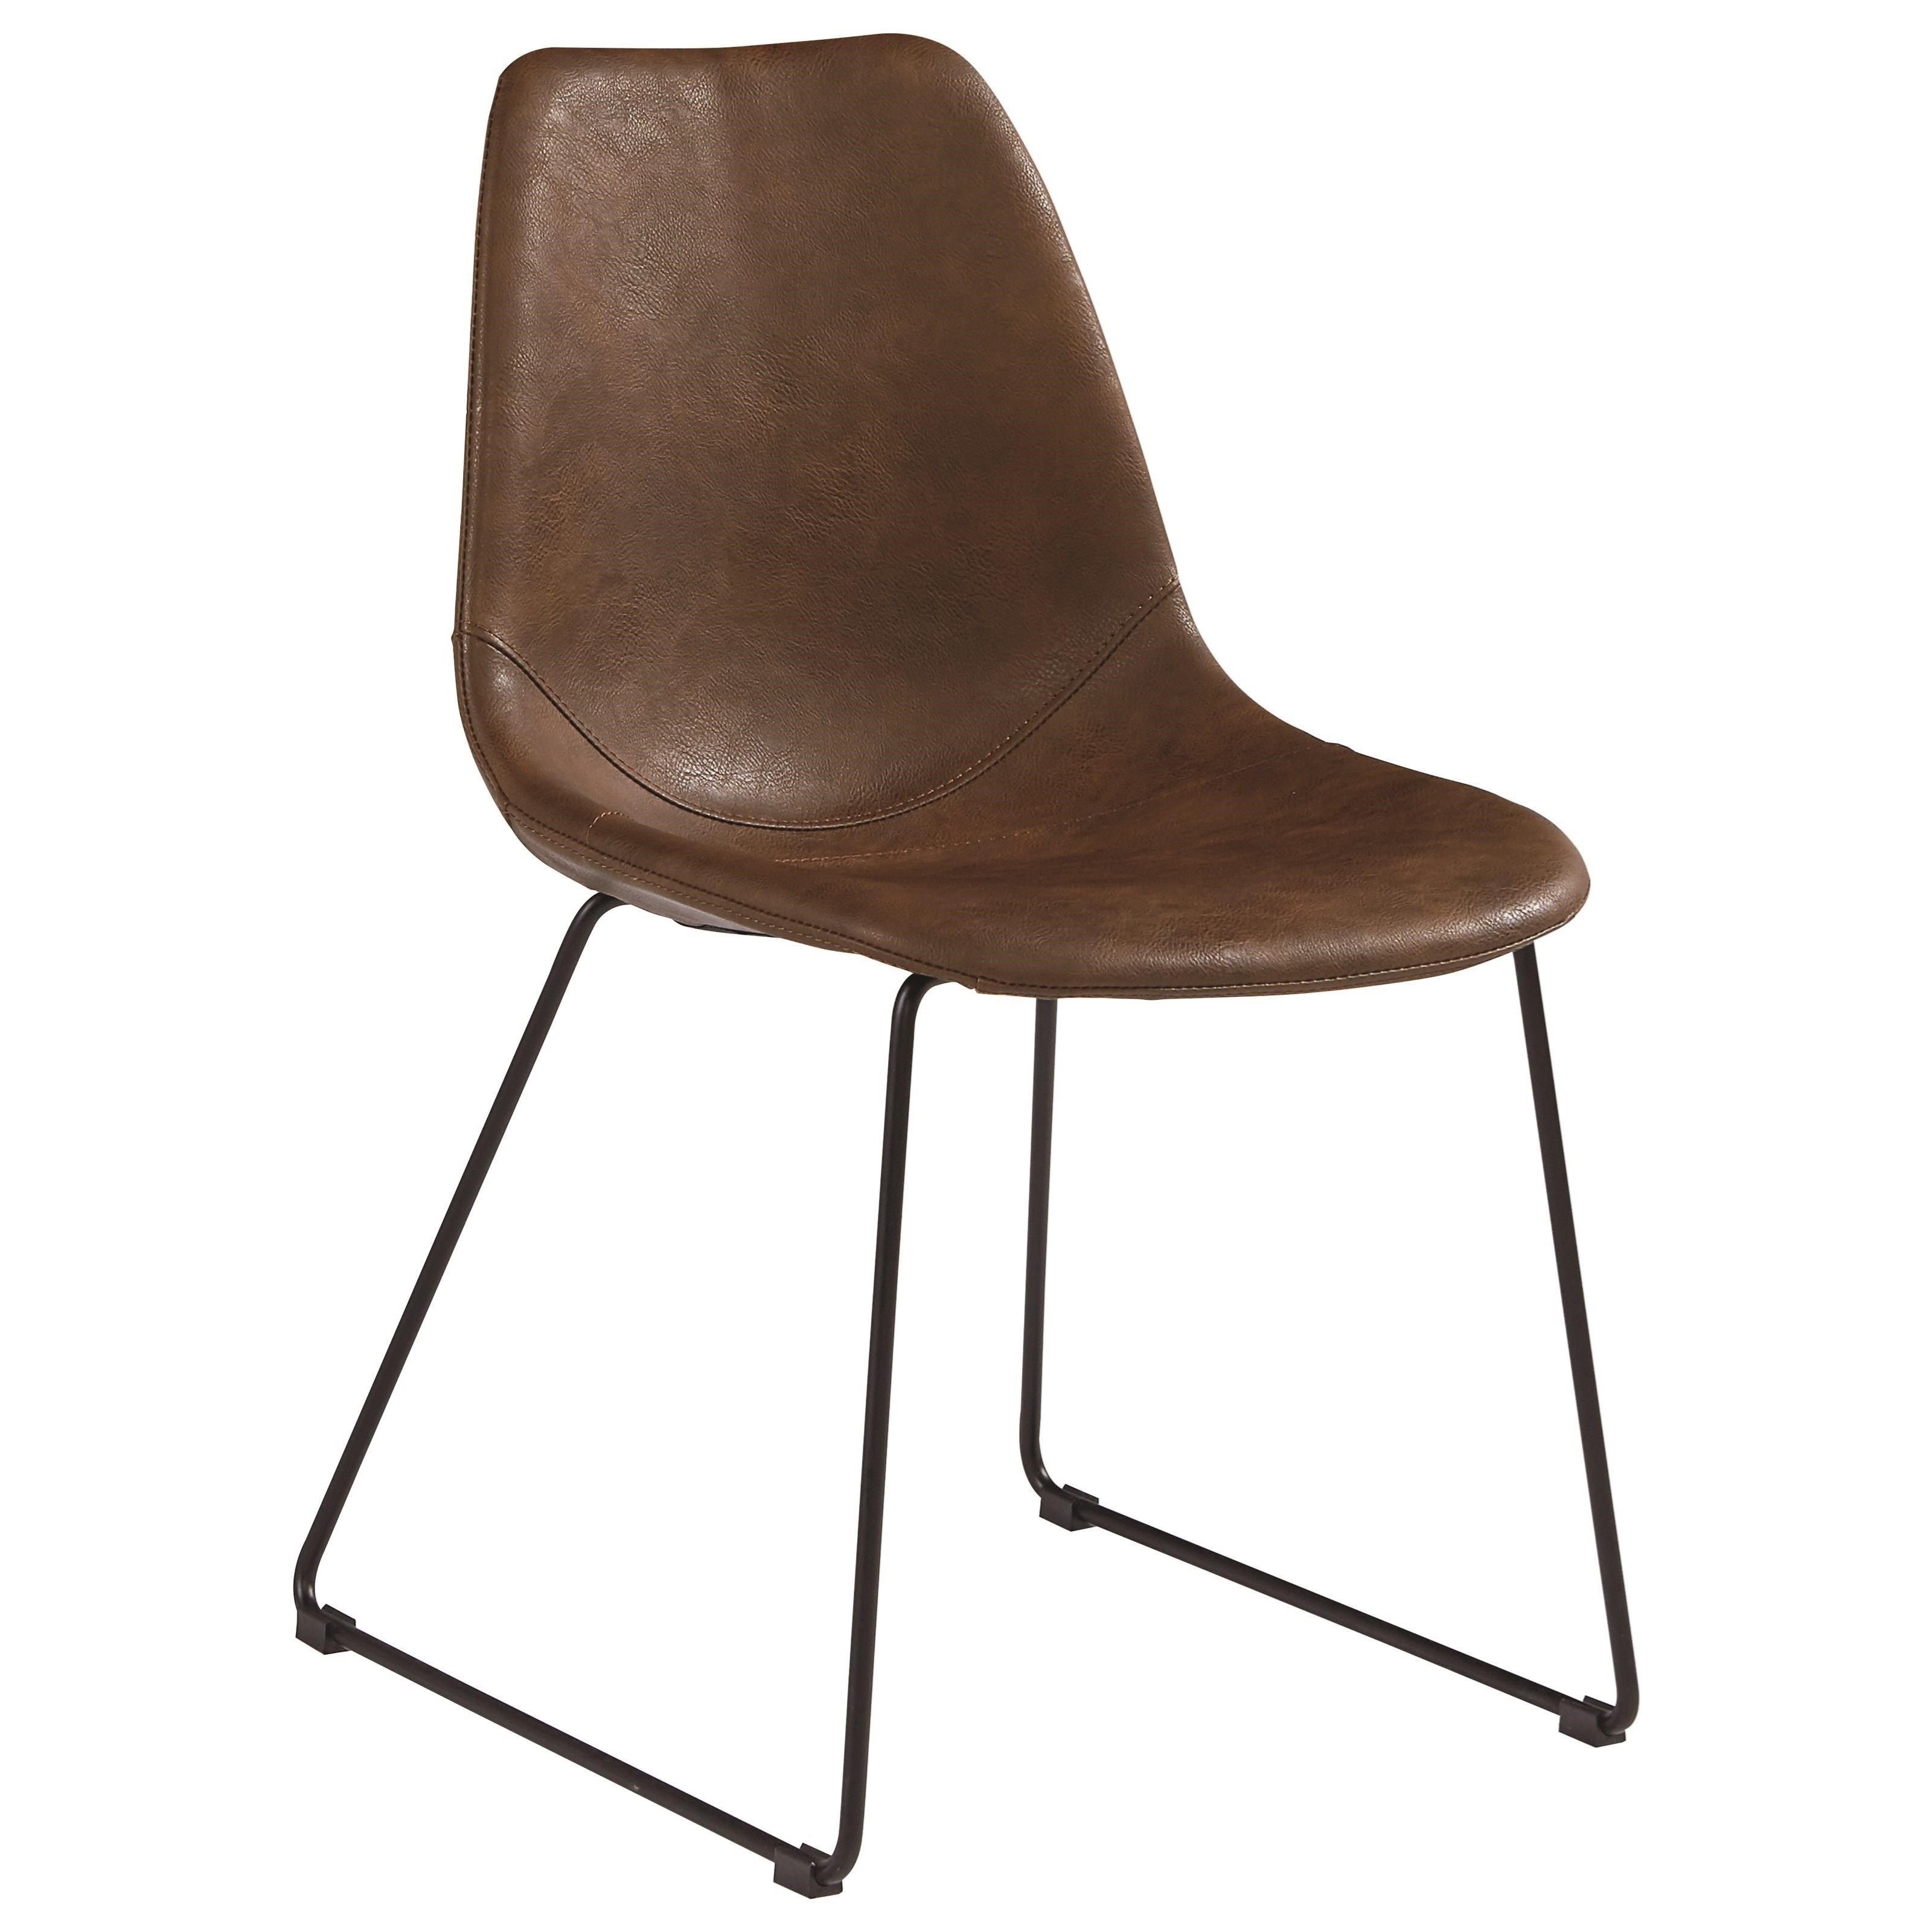 Molded Shell Side Chair With Brown Pu Leather Like Fabric Intended For Most Up To Date Magnolia Home Entwine Rattan Side Chairs (View 5 of 20)